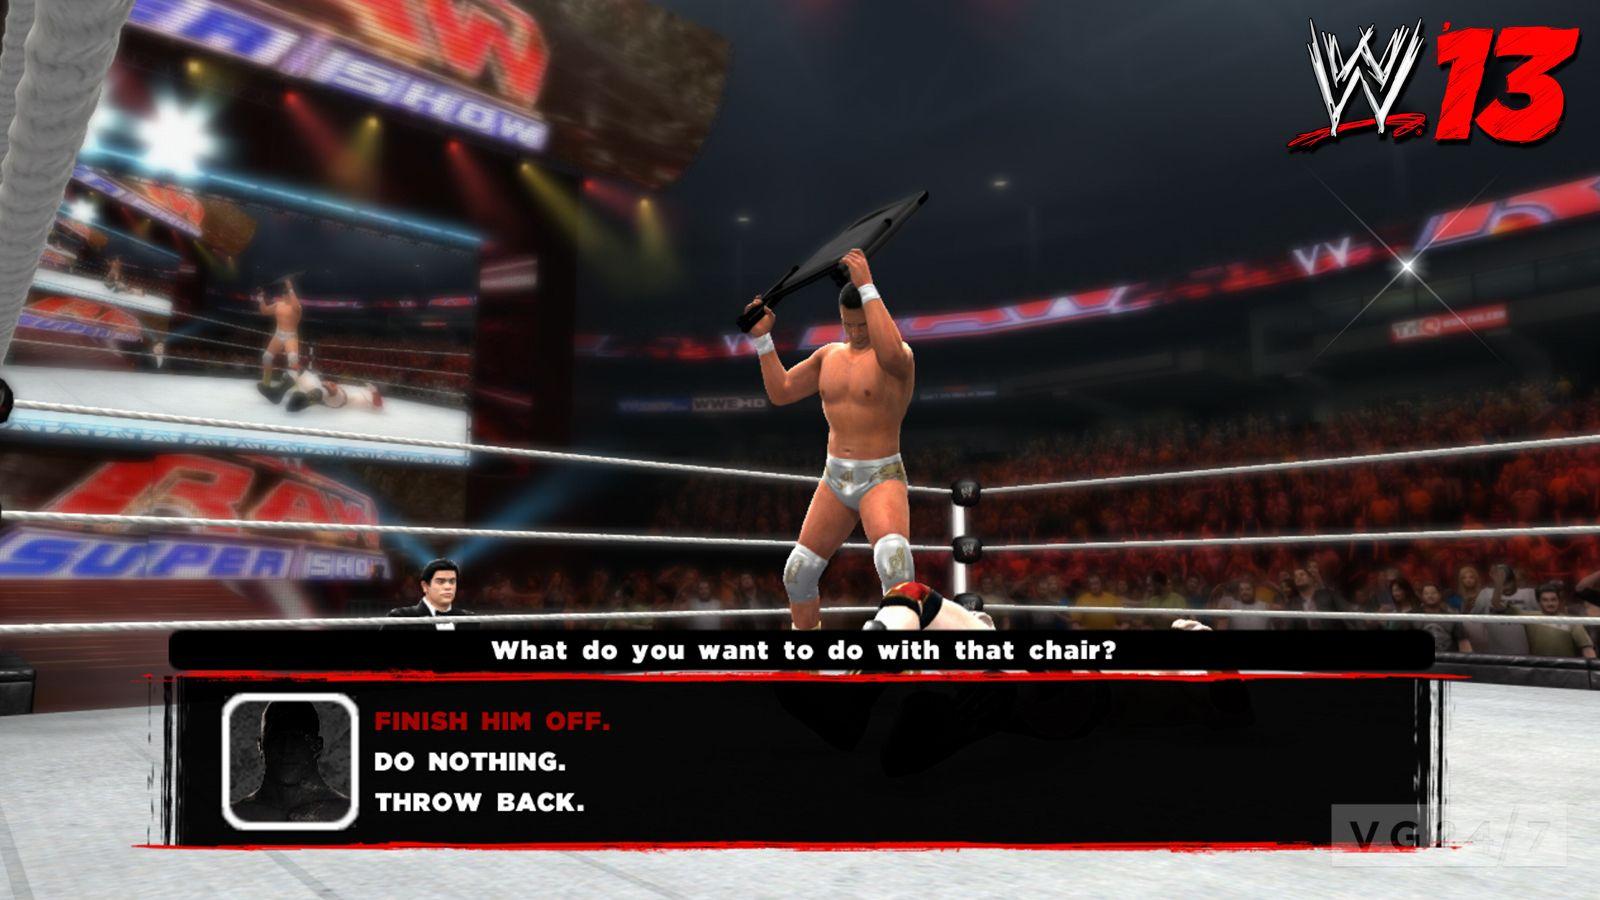 WWE 13 Universe Mode screens and trailer lay the smack down on you